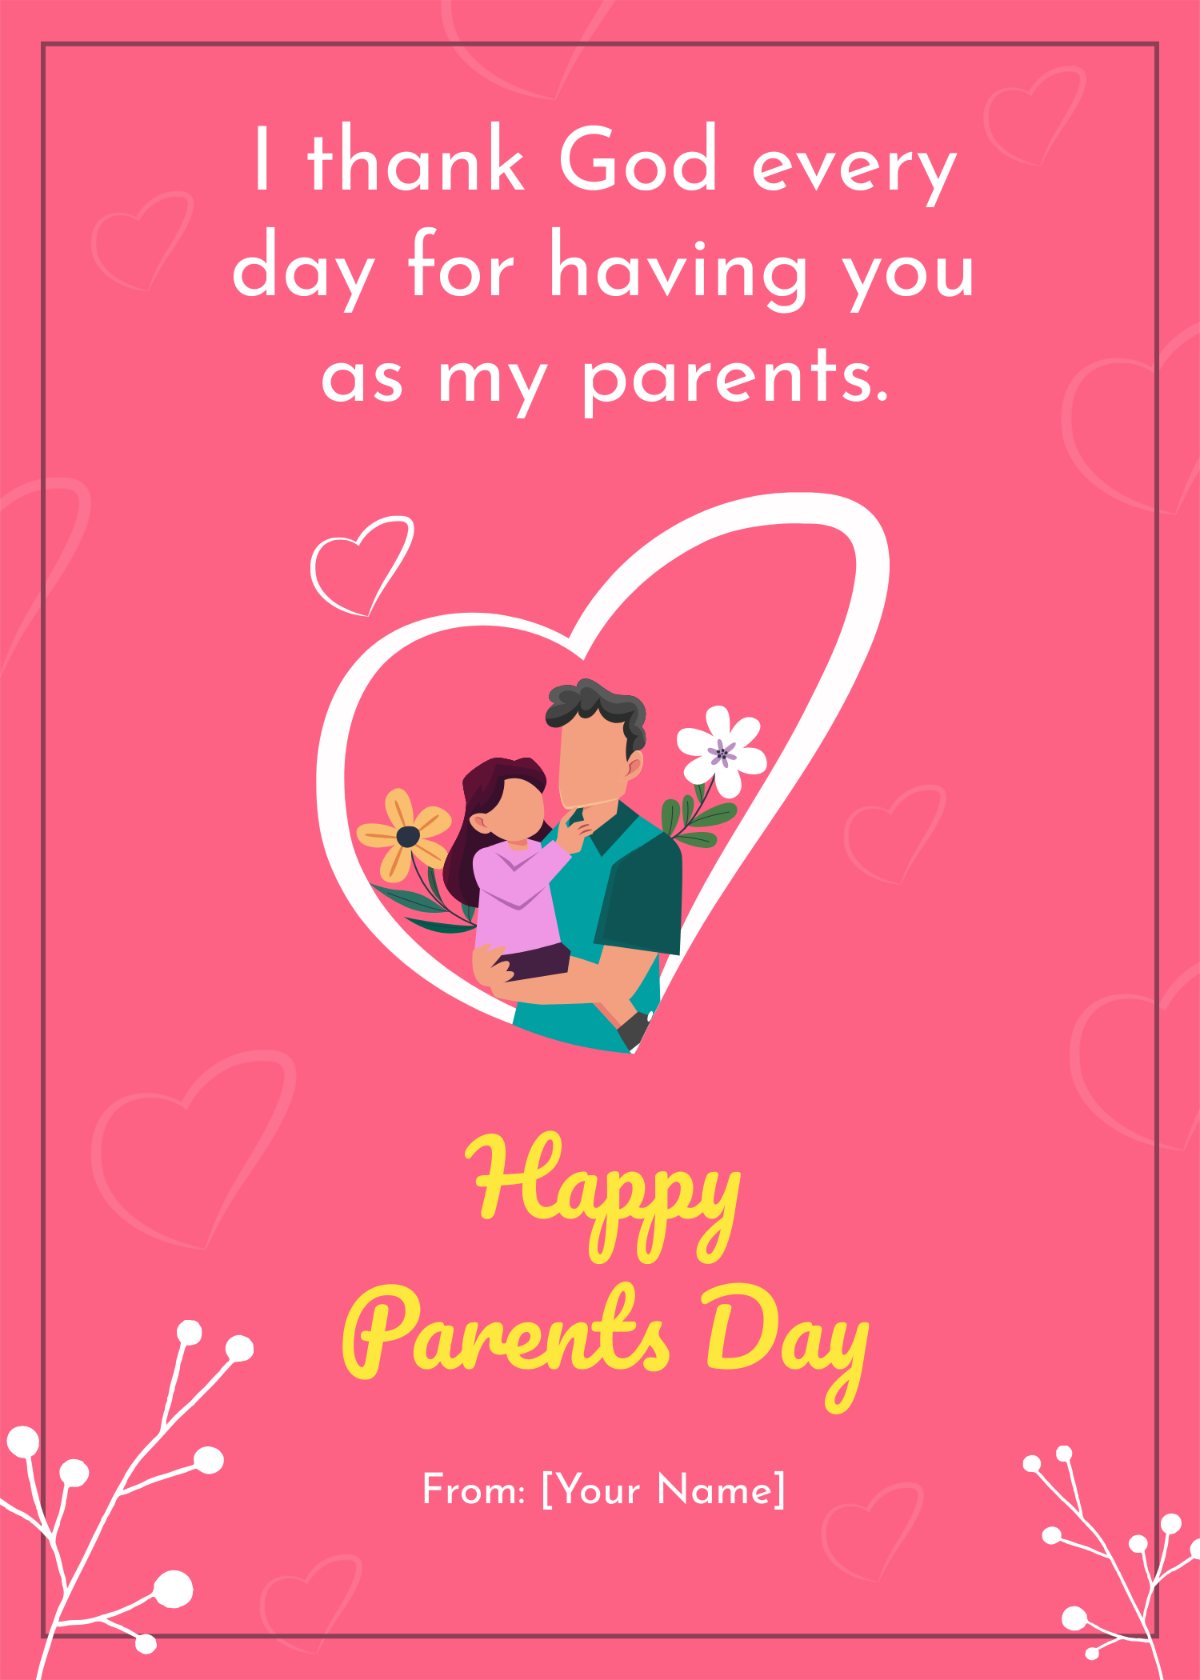 Parents Day Card for Kids